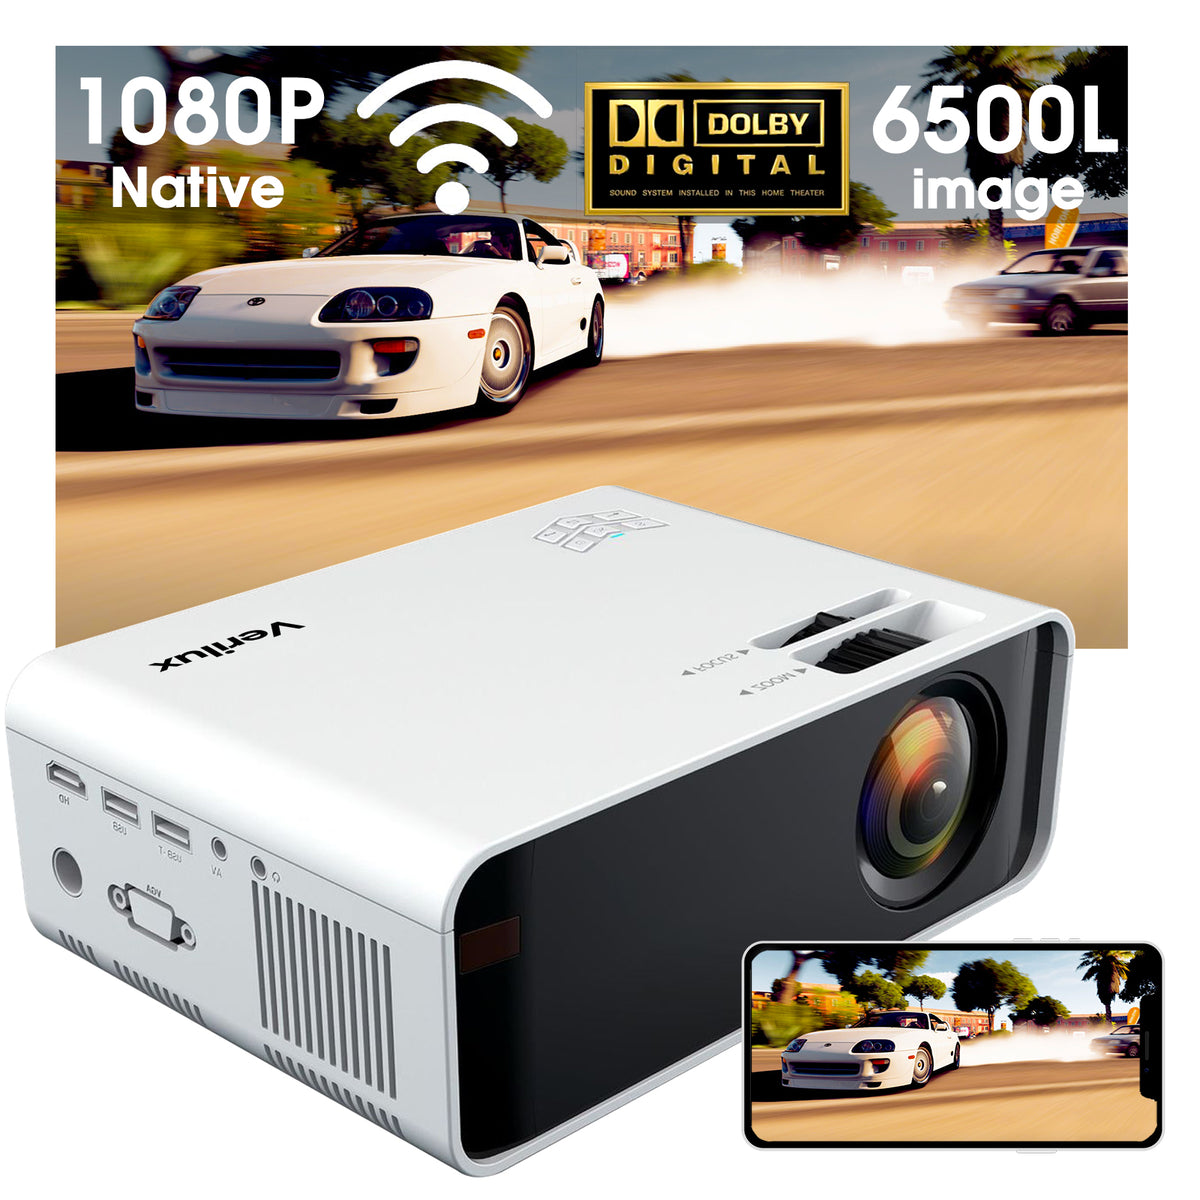 1080P WiFi Projector for Home